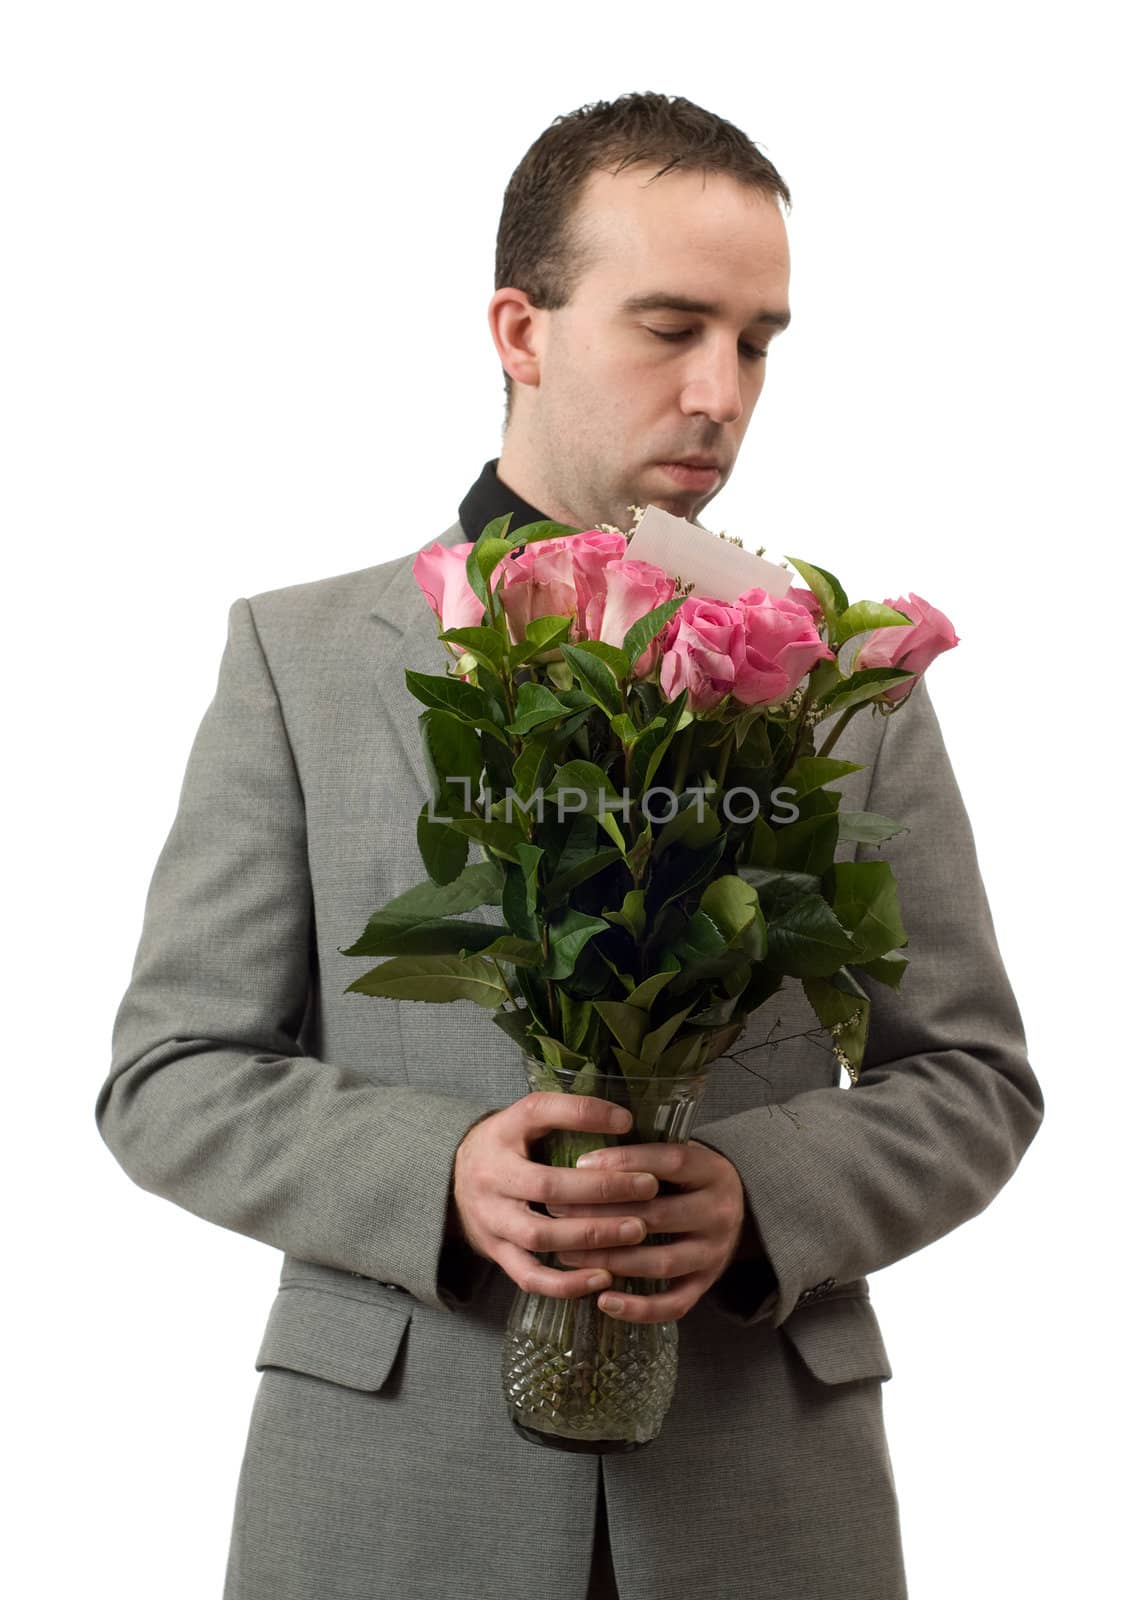 A young man wearing a formal suit is smelling some roses in a vase, isolated against a white background